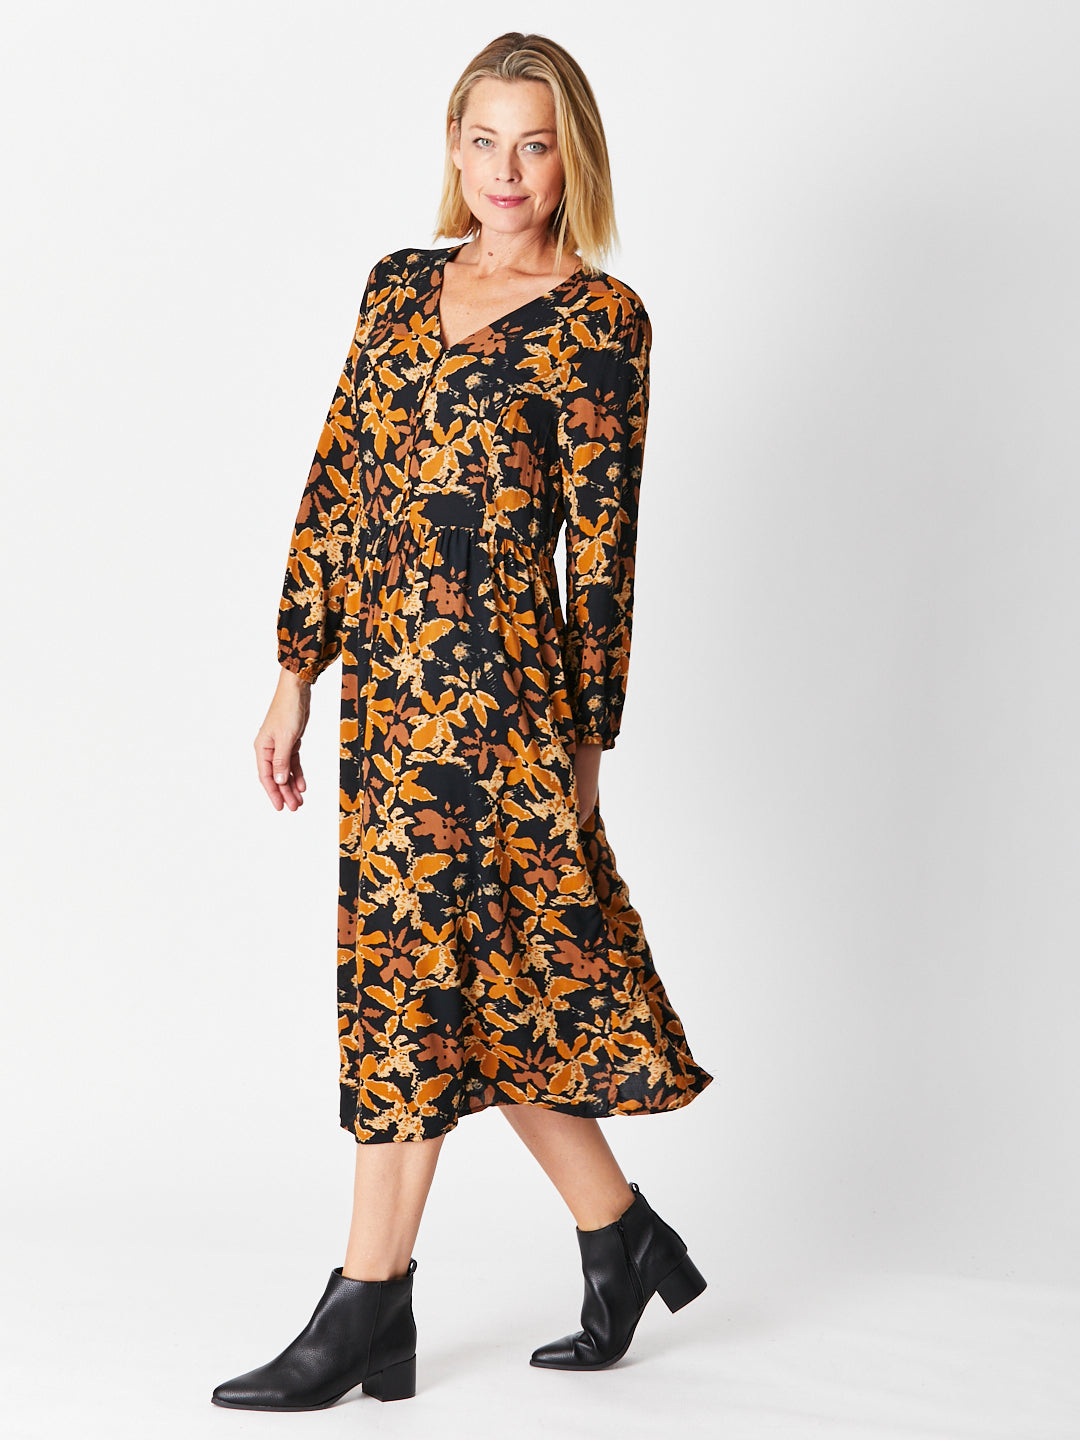 Toffee Floral Dress